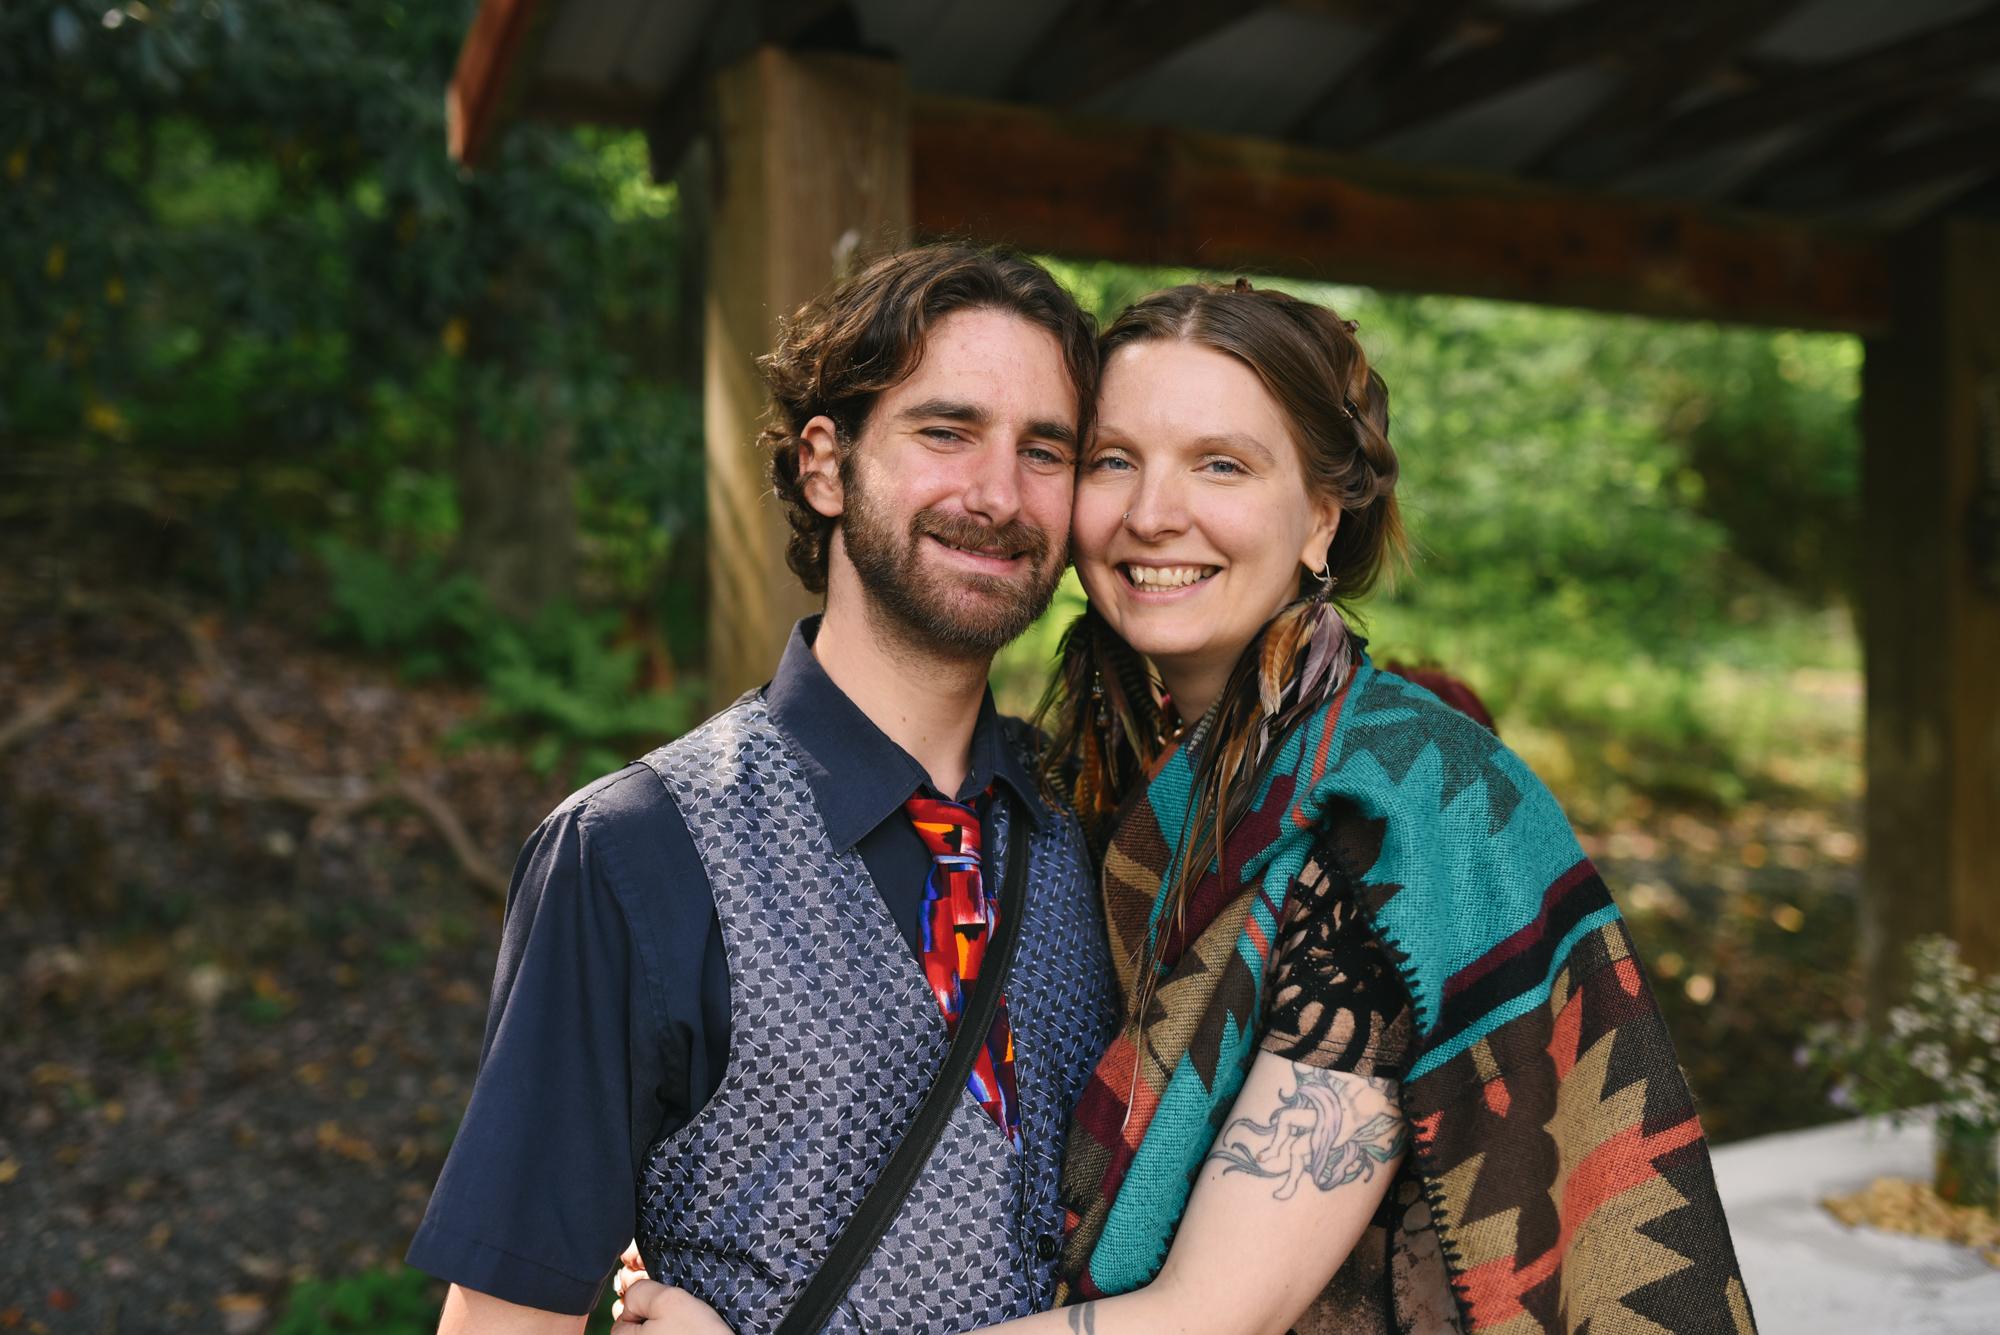  Mountain Wedding, Outdoors, Rustic, West Virginia, Maryland Wedding Photographer, DIY, Casual, Portrait of wedding guests, Sweet couple at ceremony 